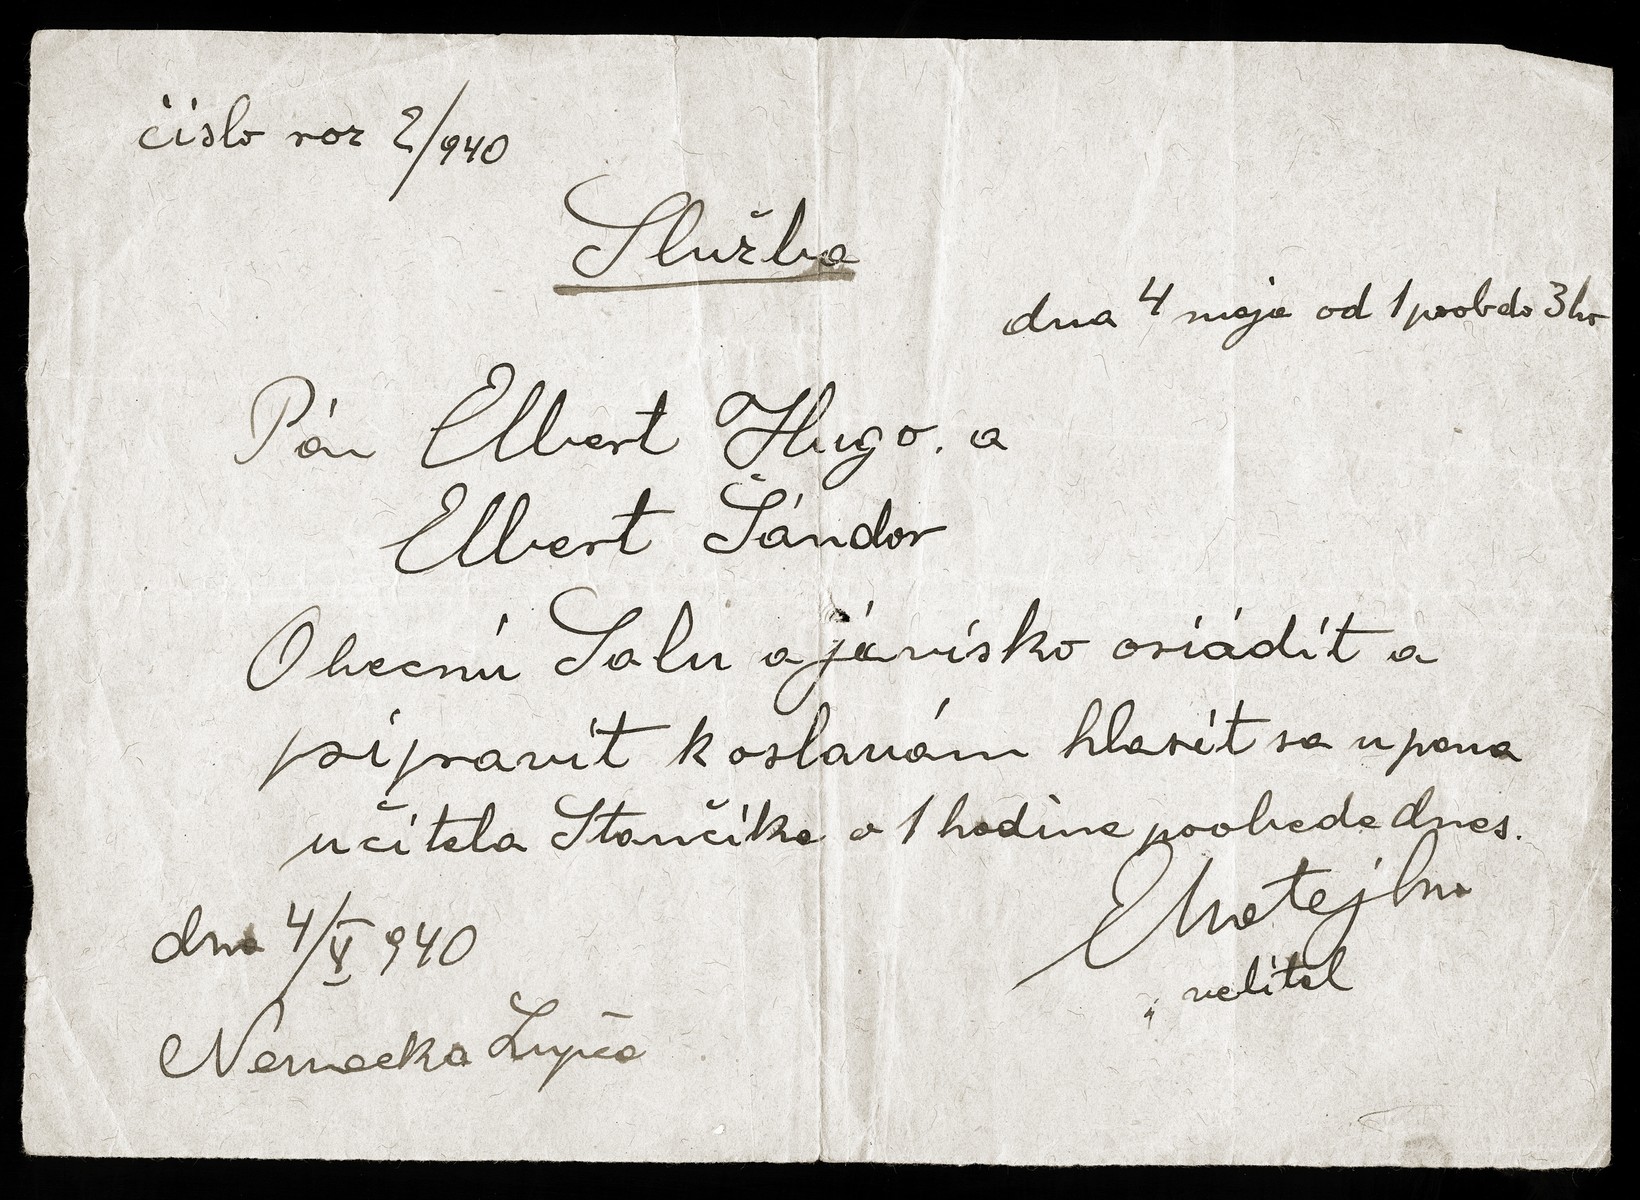 Handwritten message to Hugo and Alexander Elbert ordering them to clean a meeting hall and set up tables and chairs for a Hlinka Guard gathering.